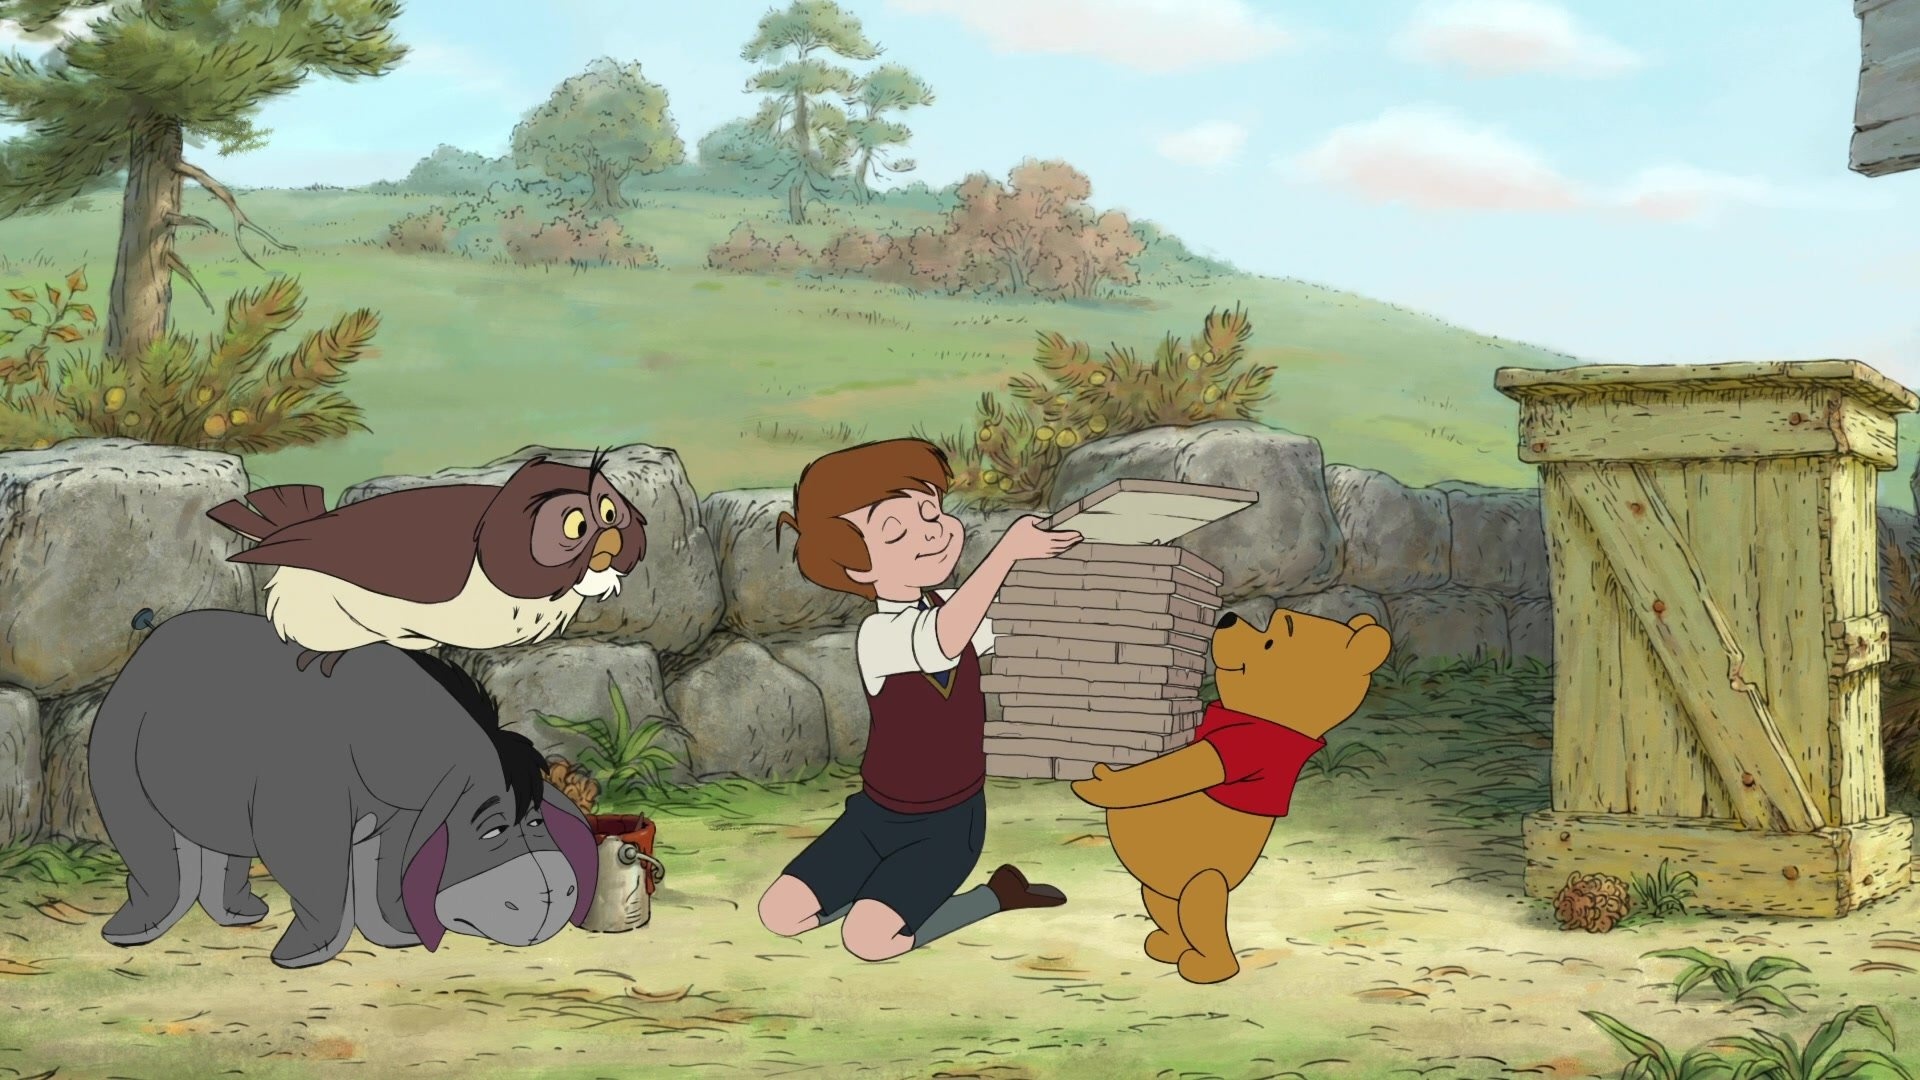 Christopher Robin, Winnie the Pooh image, Image Abyss, 1920x1080 Full HD Desktop